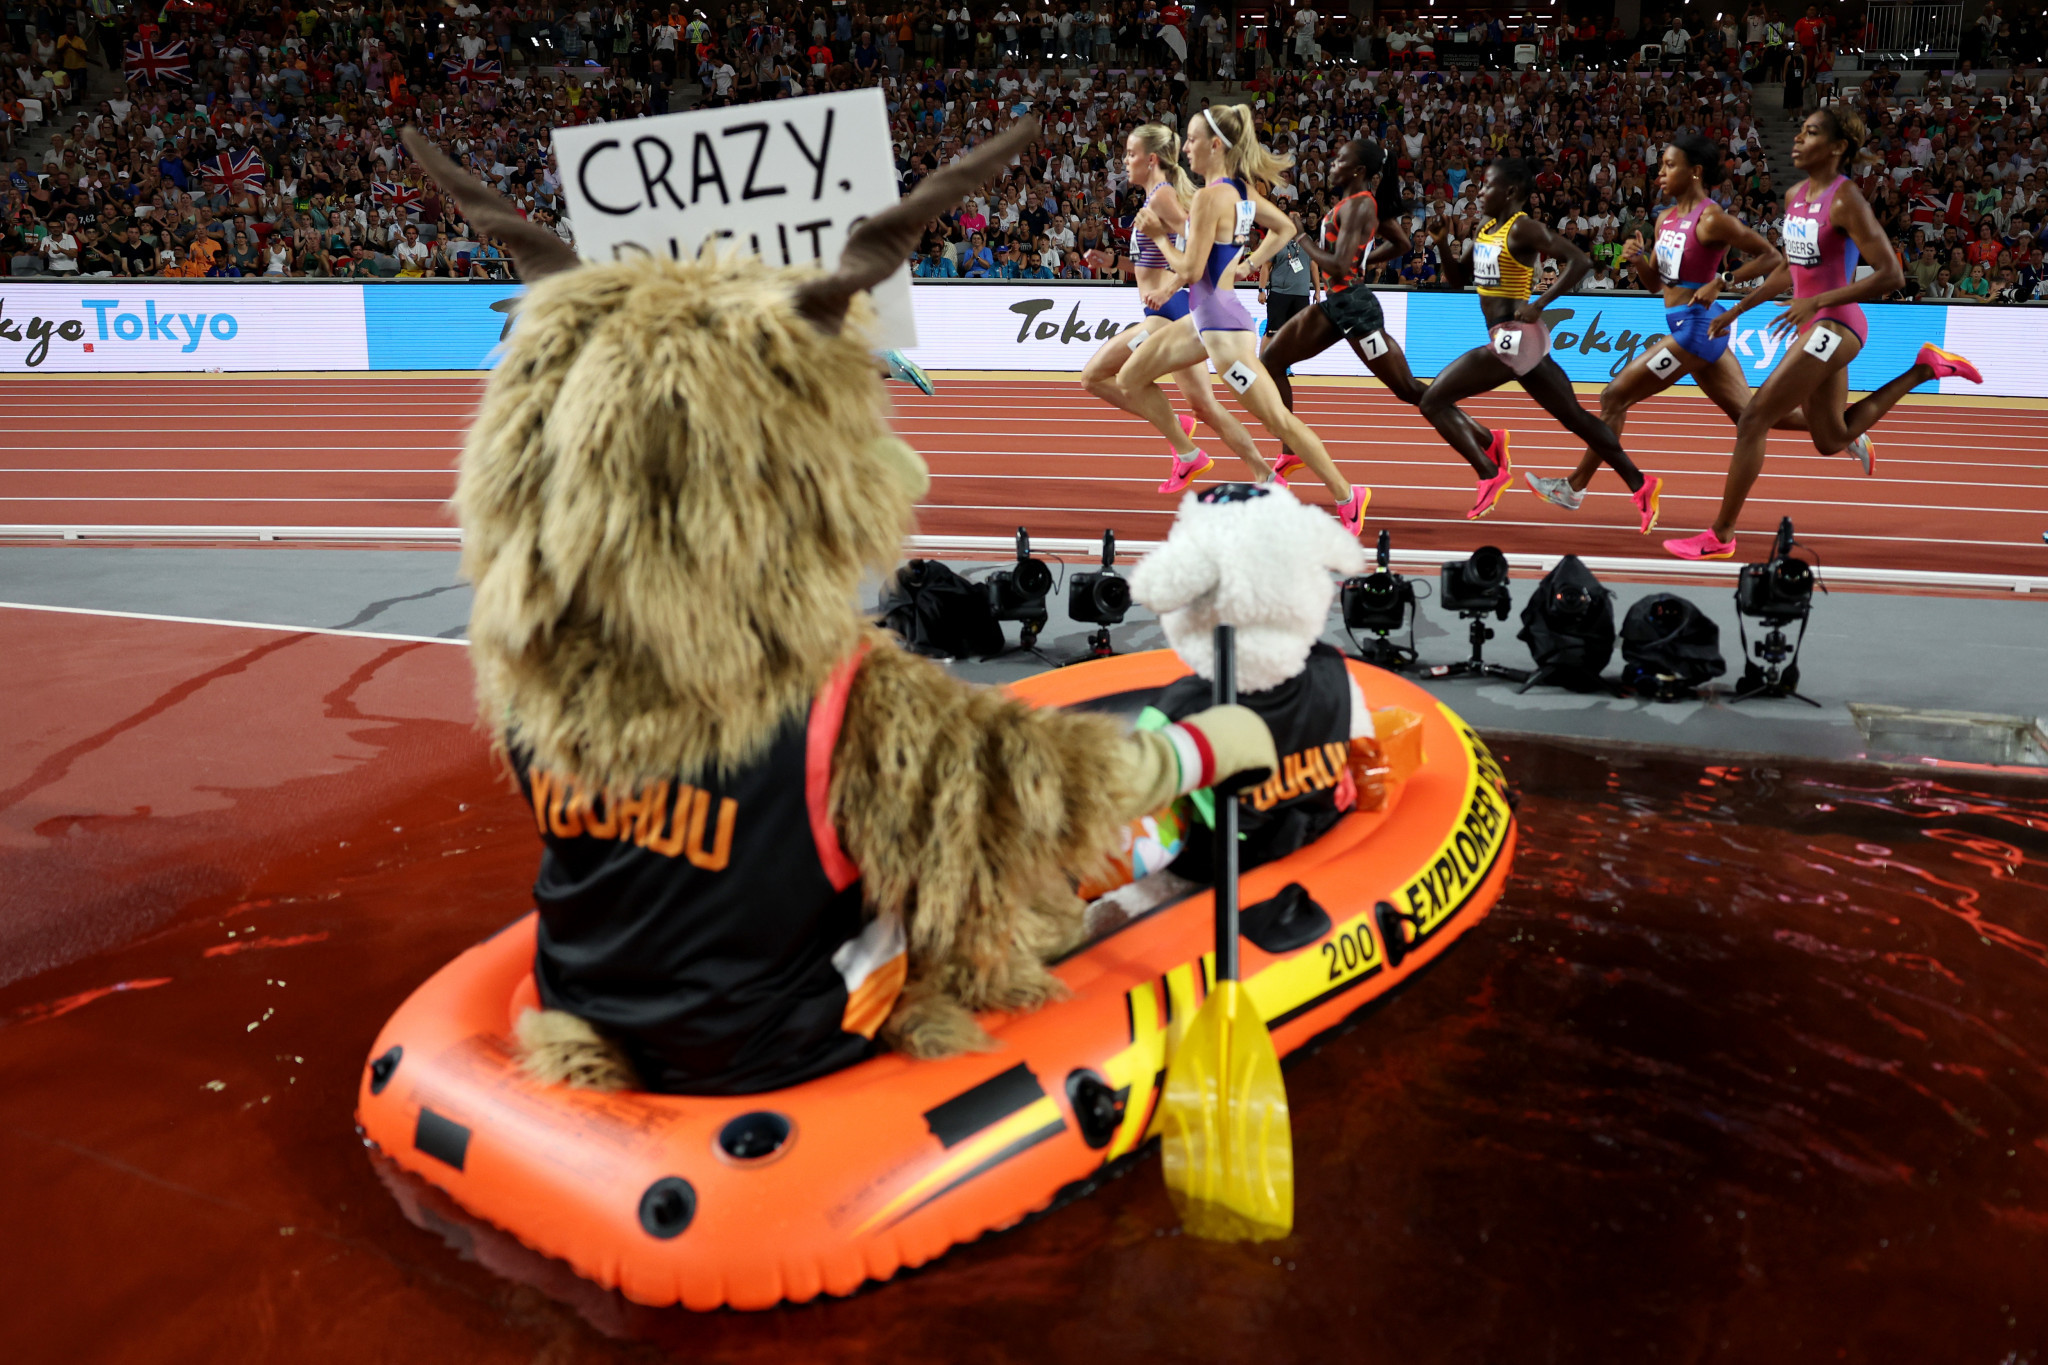 Championships mascot Youhuu, a Hungarian racka sheep, has proved a hit for eccentric behaviour and encouraged crowd support from the steeplechase pool during the women's 800m final ©Getty Images